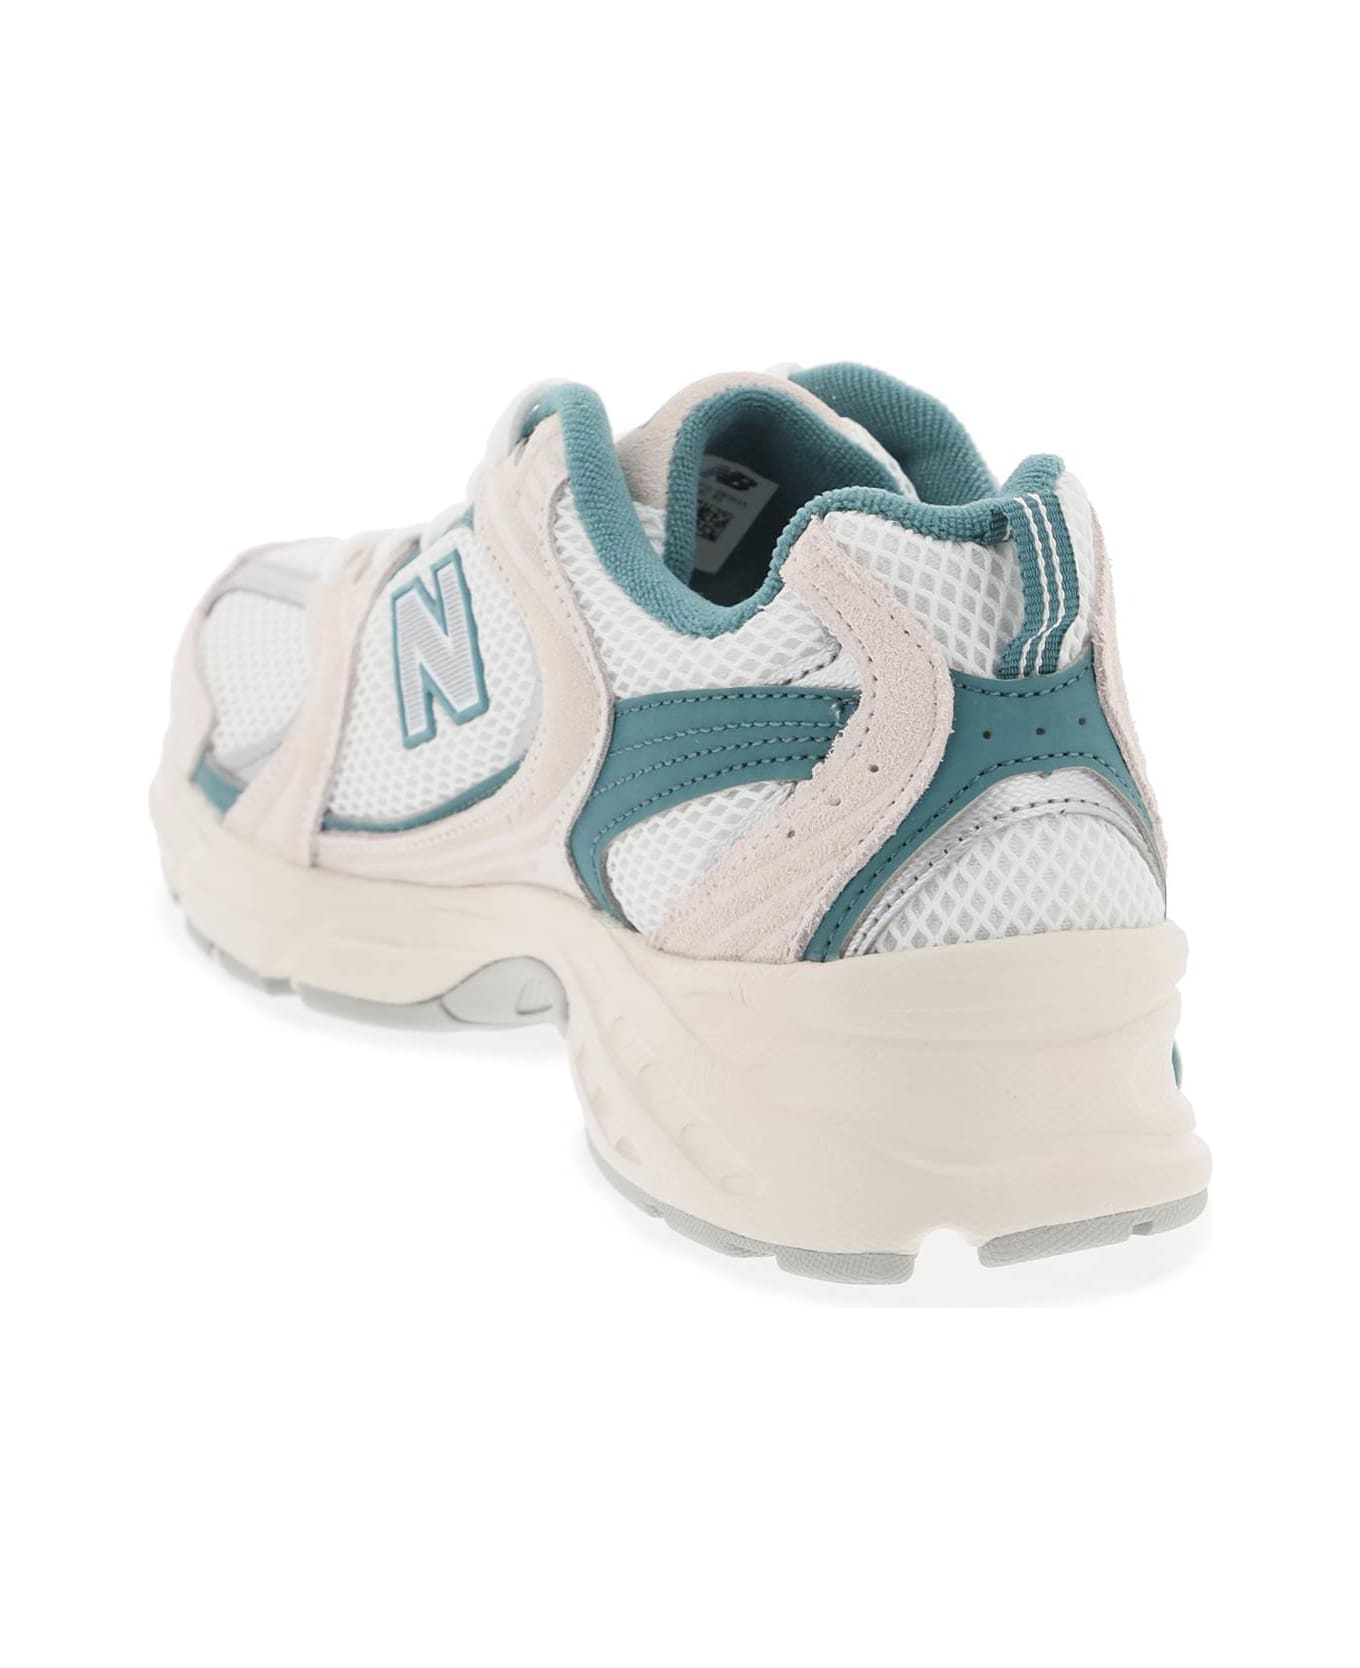 New Balance 530 Sneakers - REFLECTION (White) スニーカー